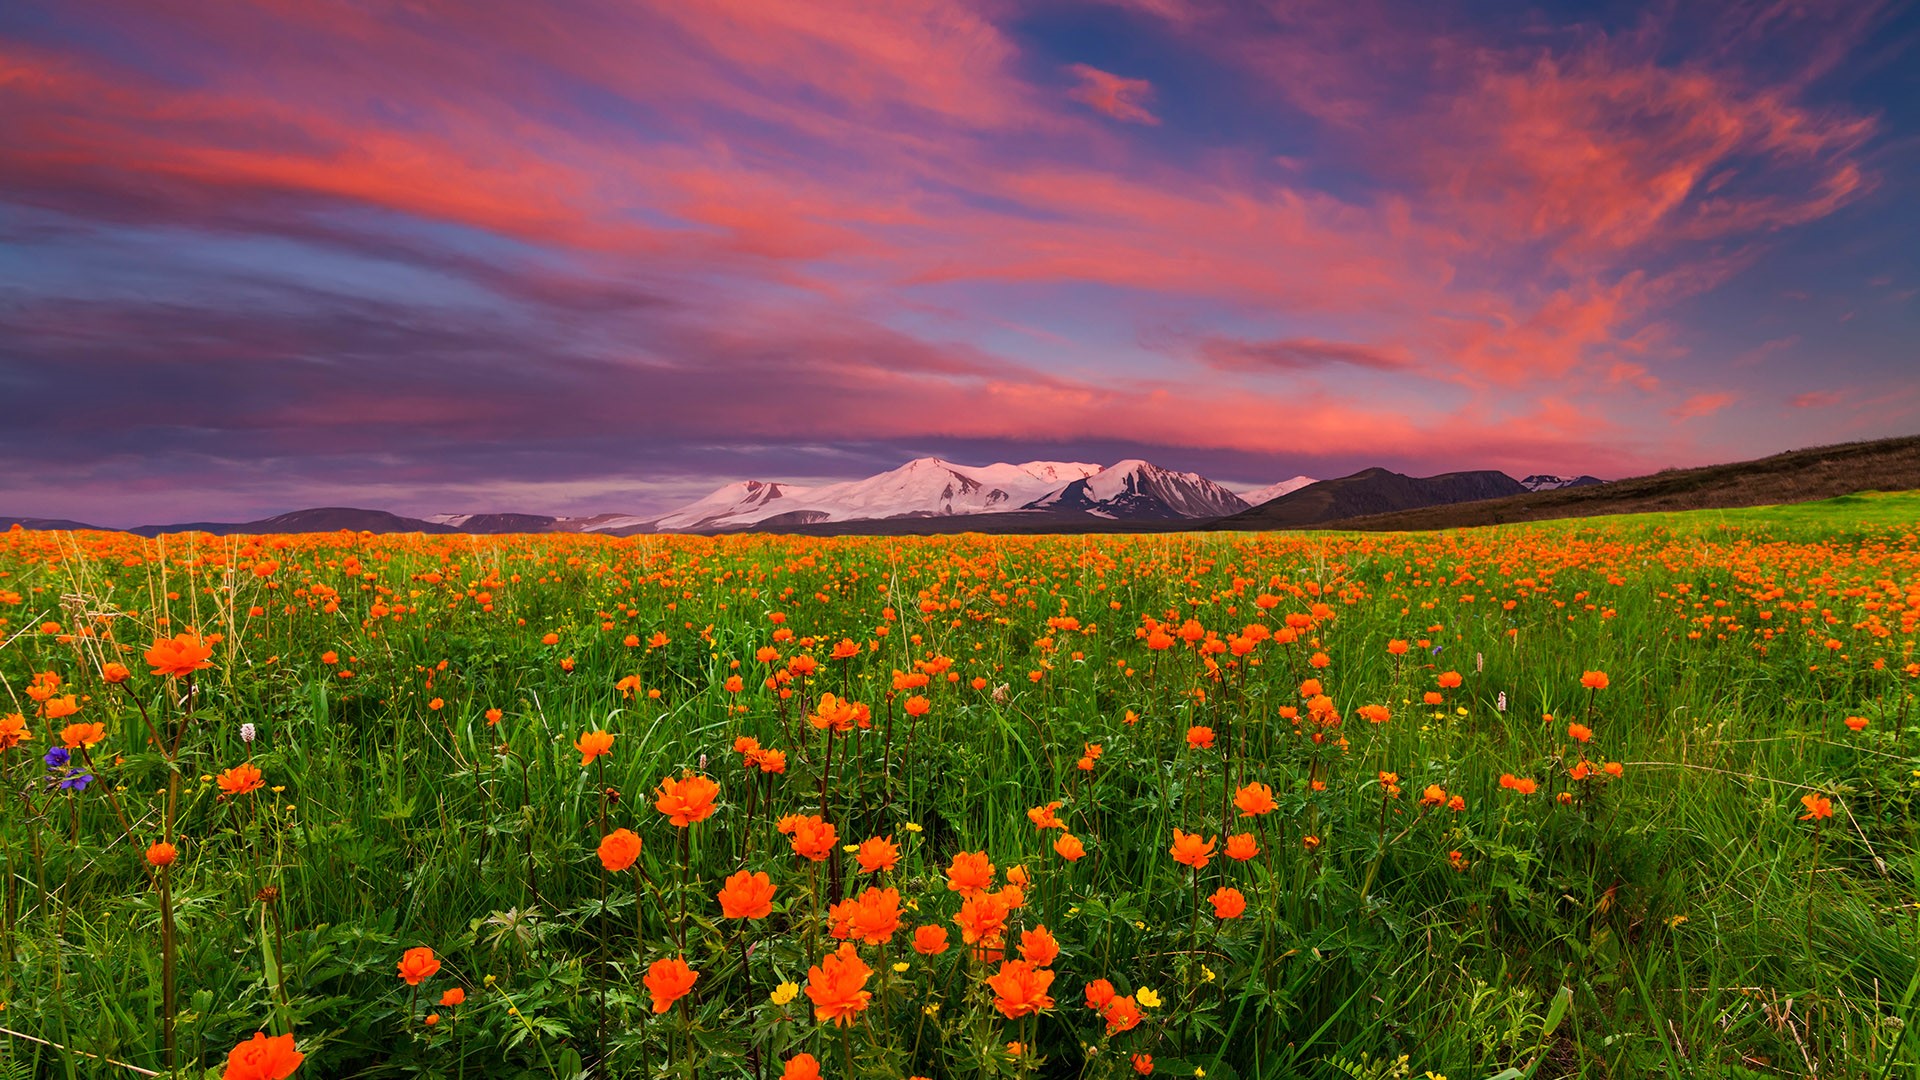 General 1920x1080 nature landscape clouds sky field flowers orange flowers plants sunset mountains snowy mountain Russia far view